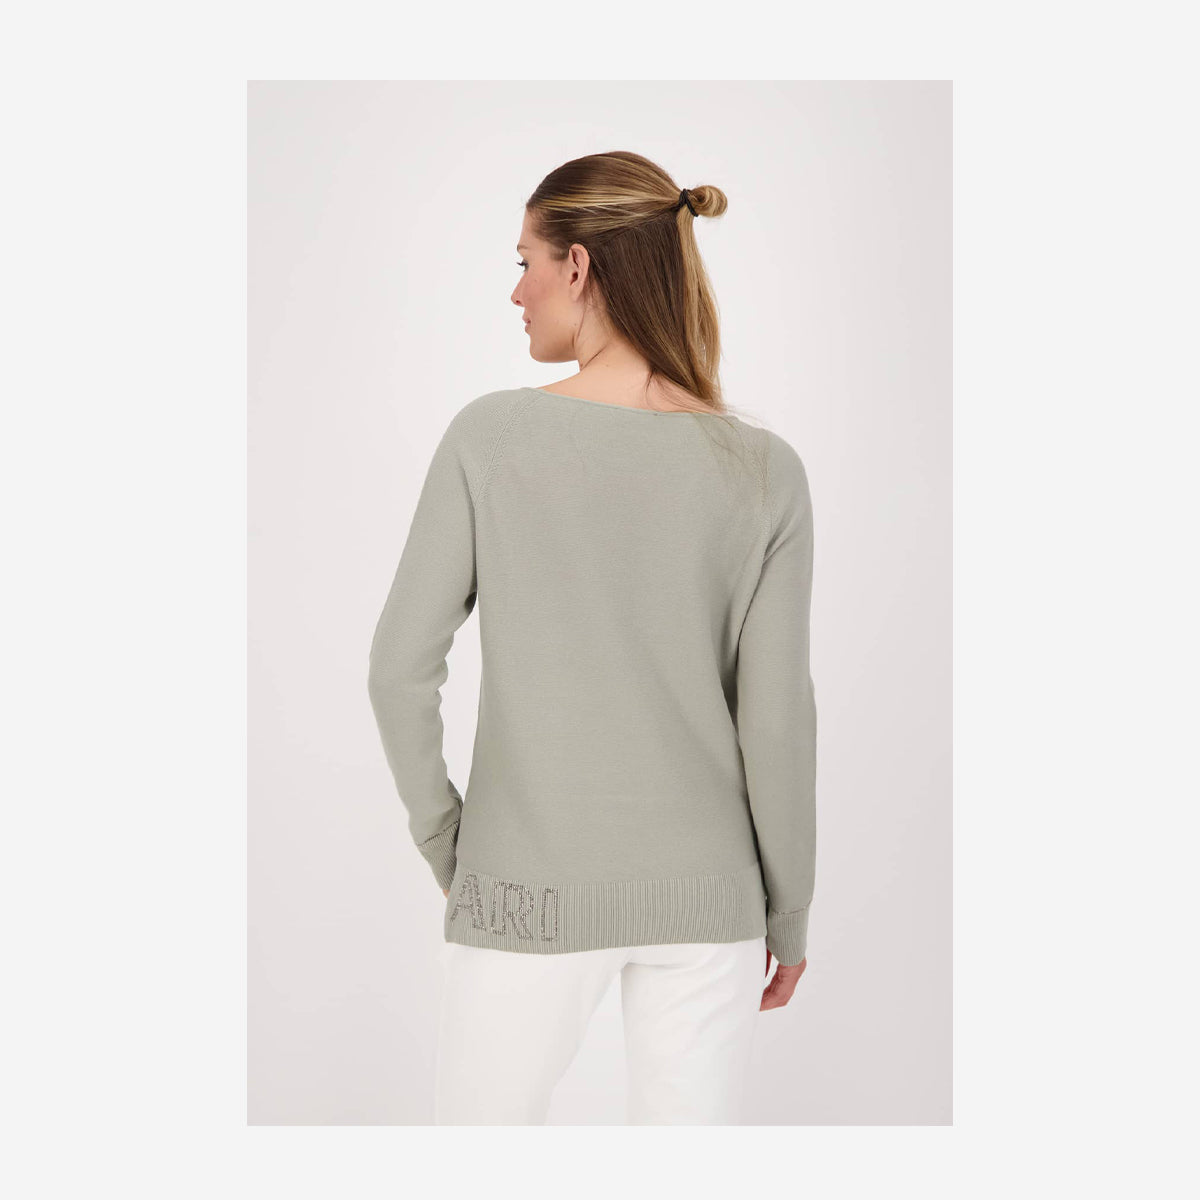 KNITTED SWEATER MADE FROM SUSTAINABLE COTTON WITH ROUND NECK